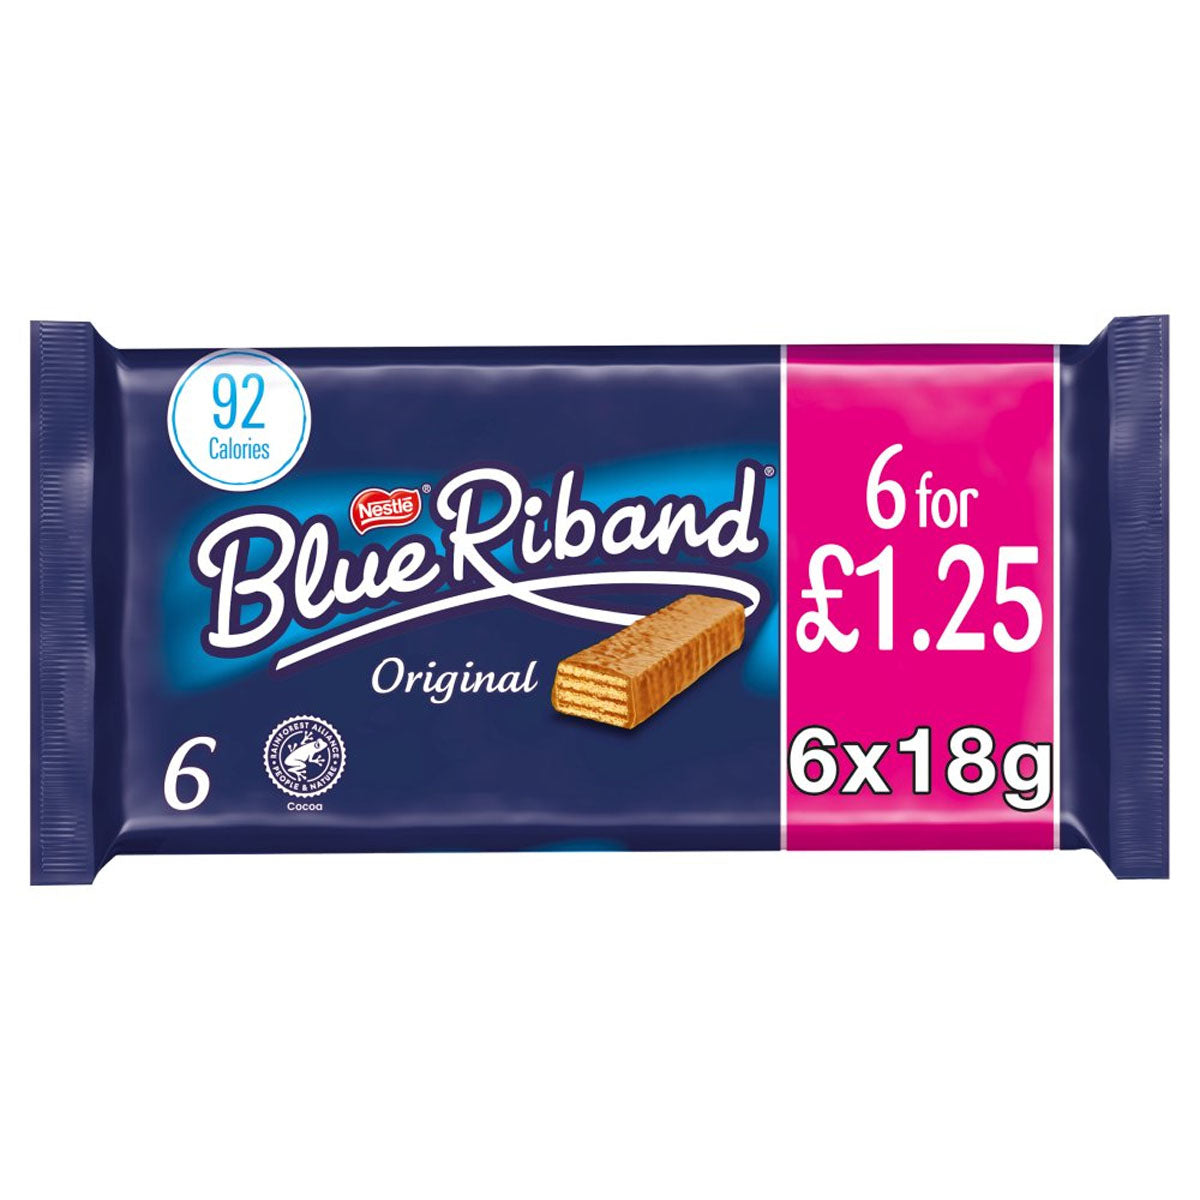 A Nestle - Blue Riband Milk Chocolate Wafer Biscuit Bar Multipack - 6x18g on a white background.